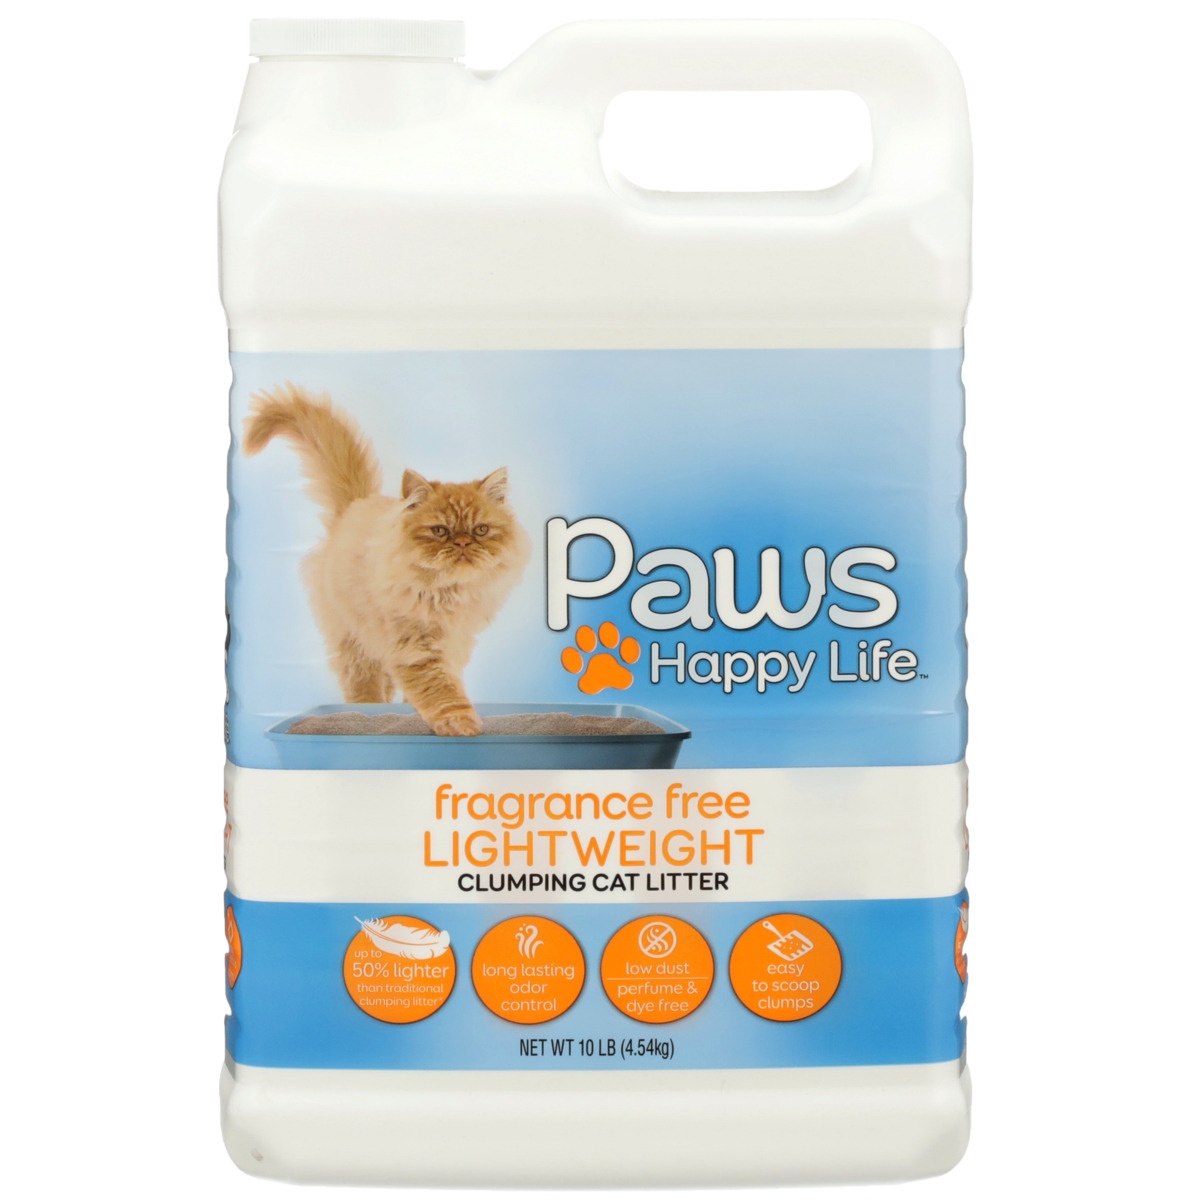 slide 7 of 8, Paws Happy Life Fragrance Free Lightweight Clumping Cat Litter, 10 lb